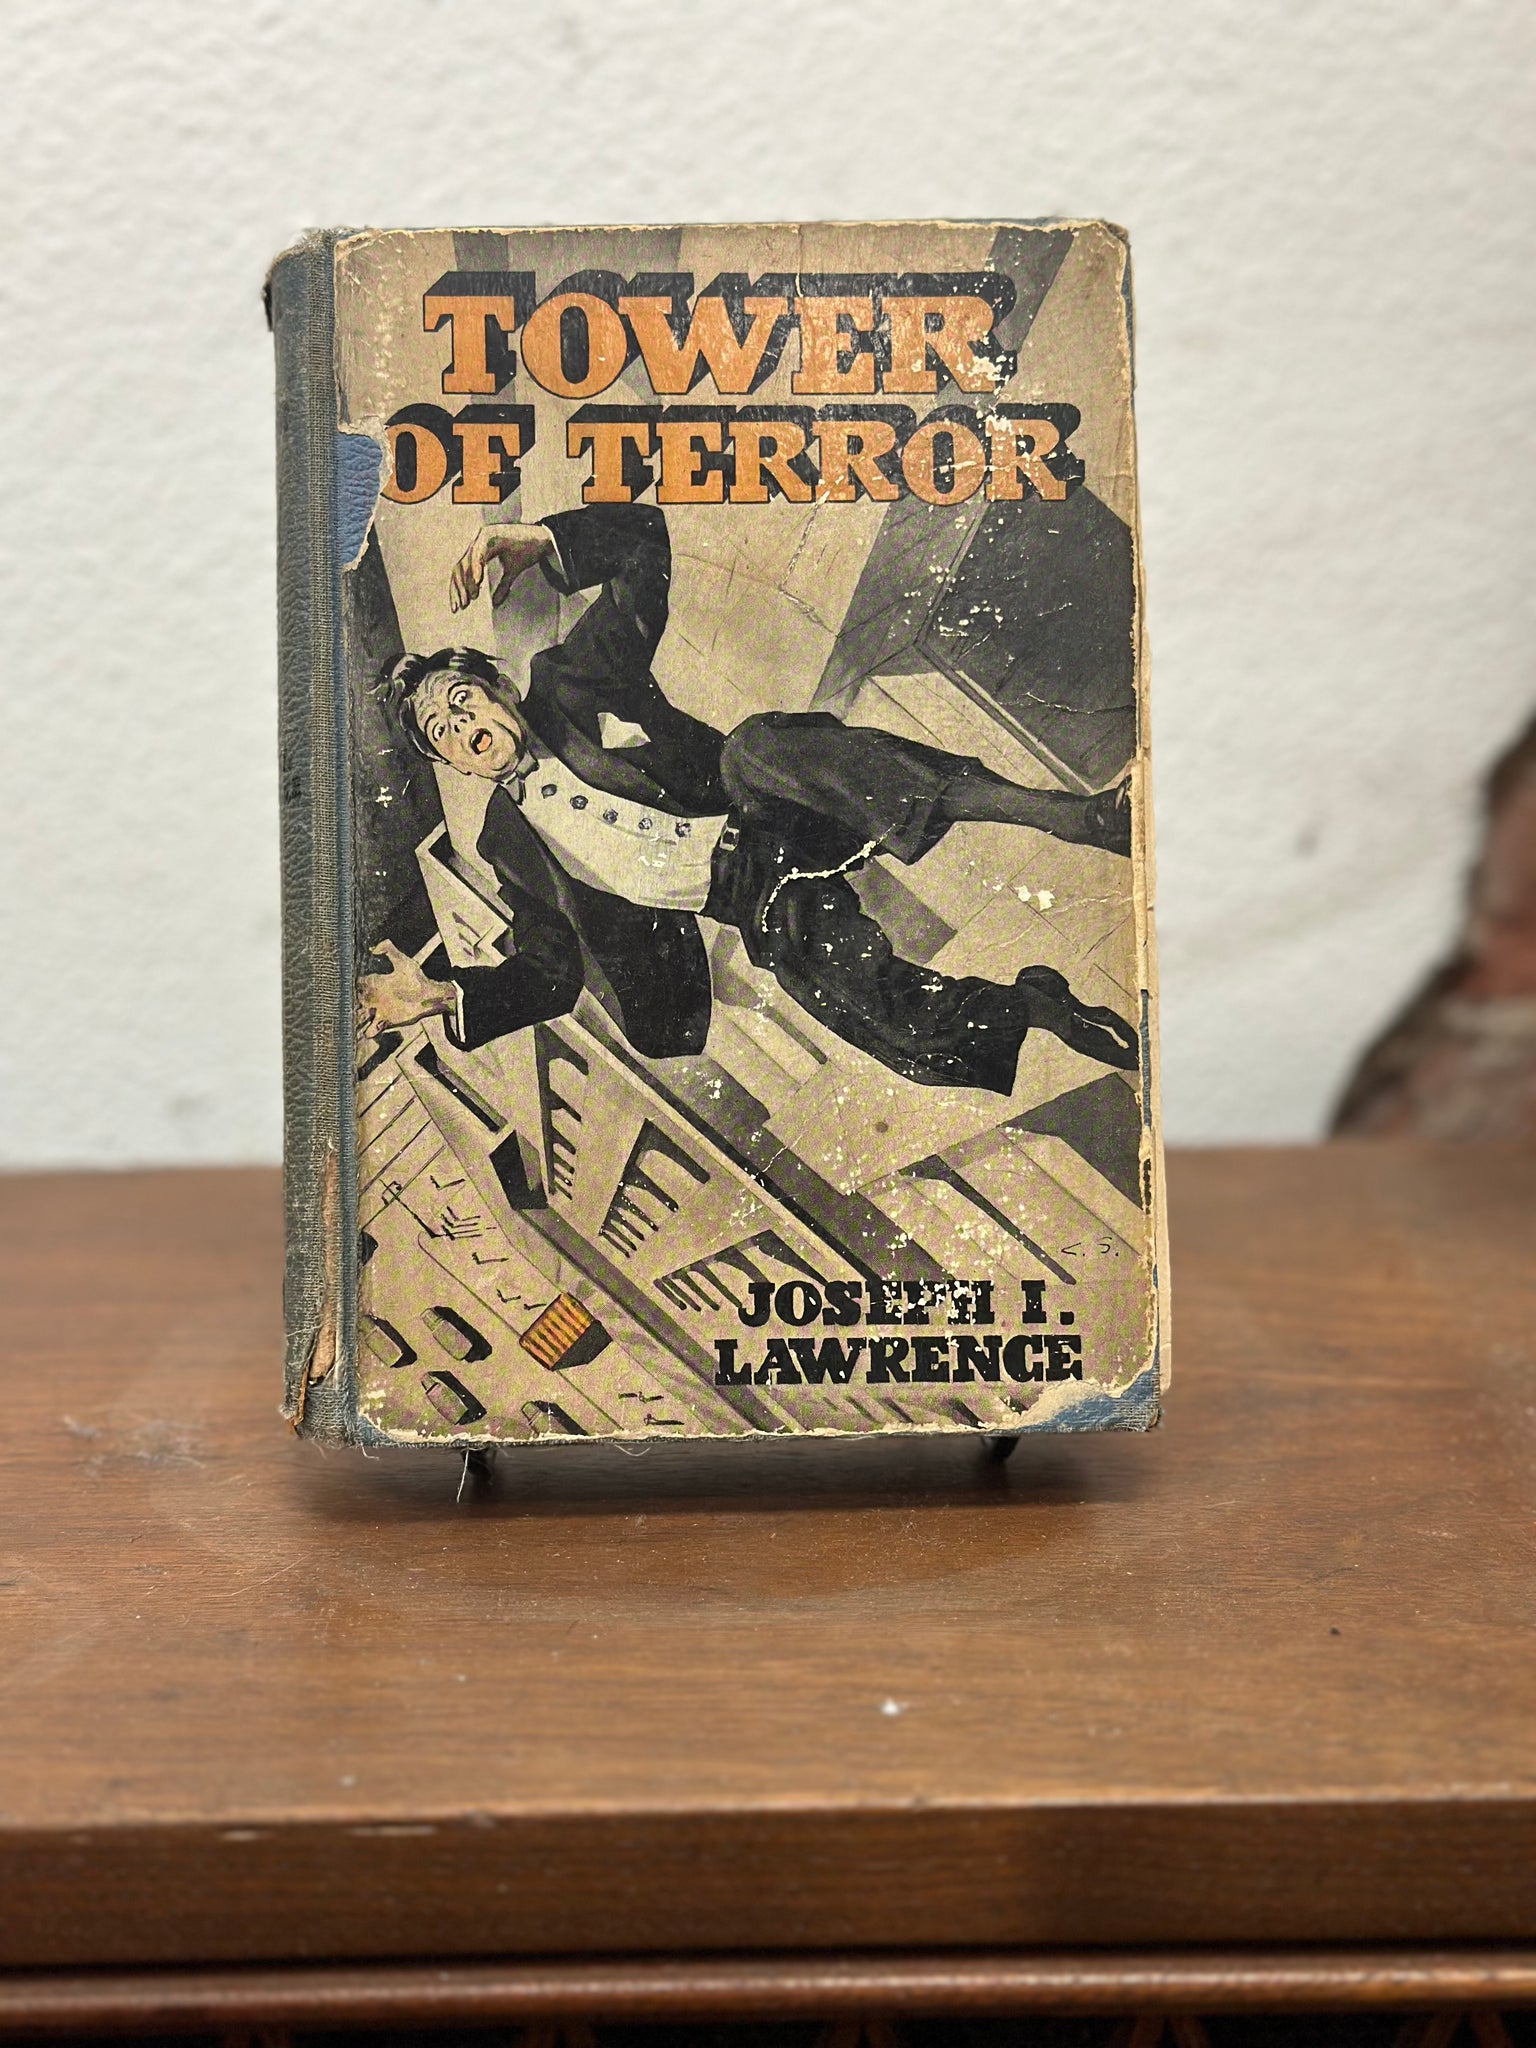 Tower of Terror by Joseph I. Lawrence